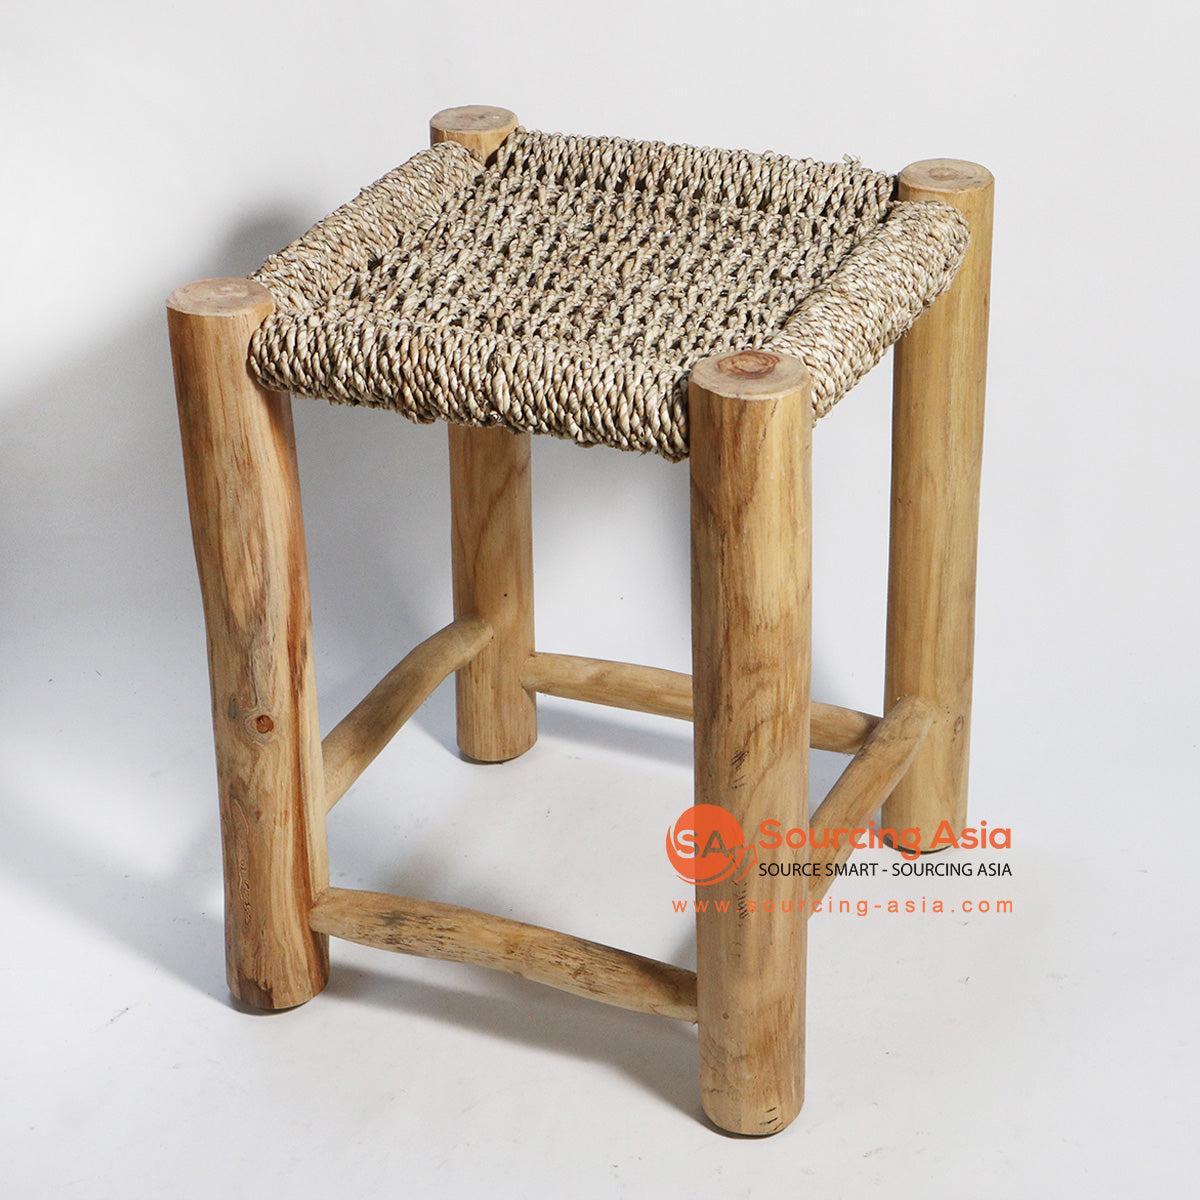 HBSC163 NATURAL SEAGRASS SQUARE STOOL